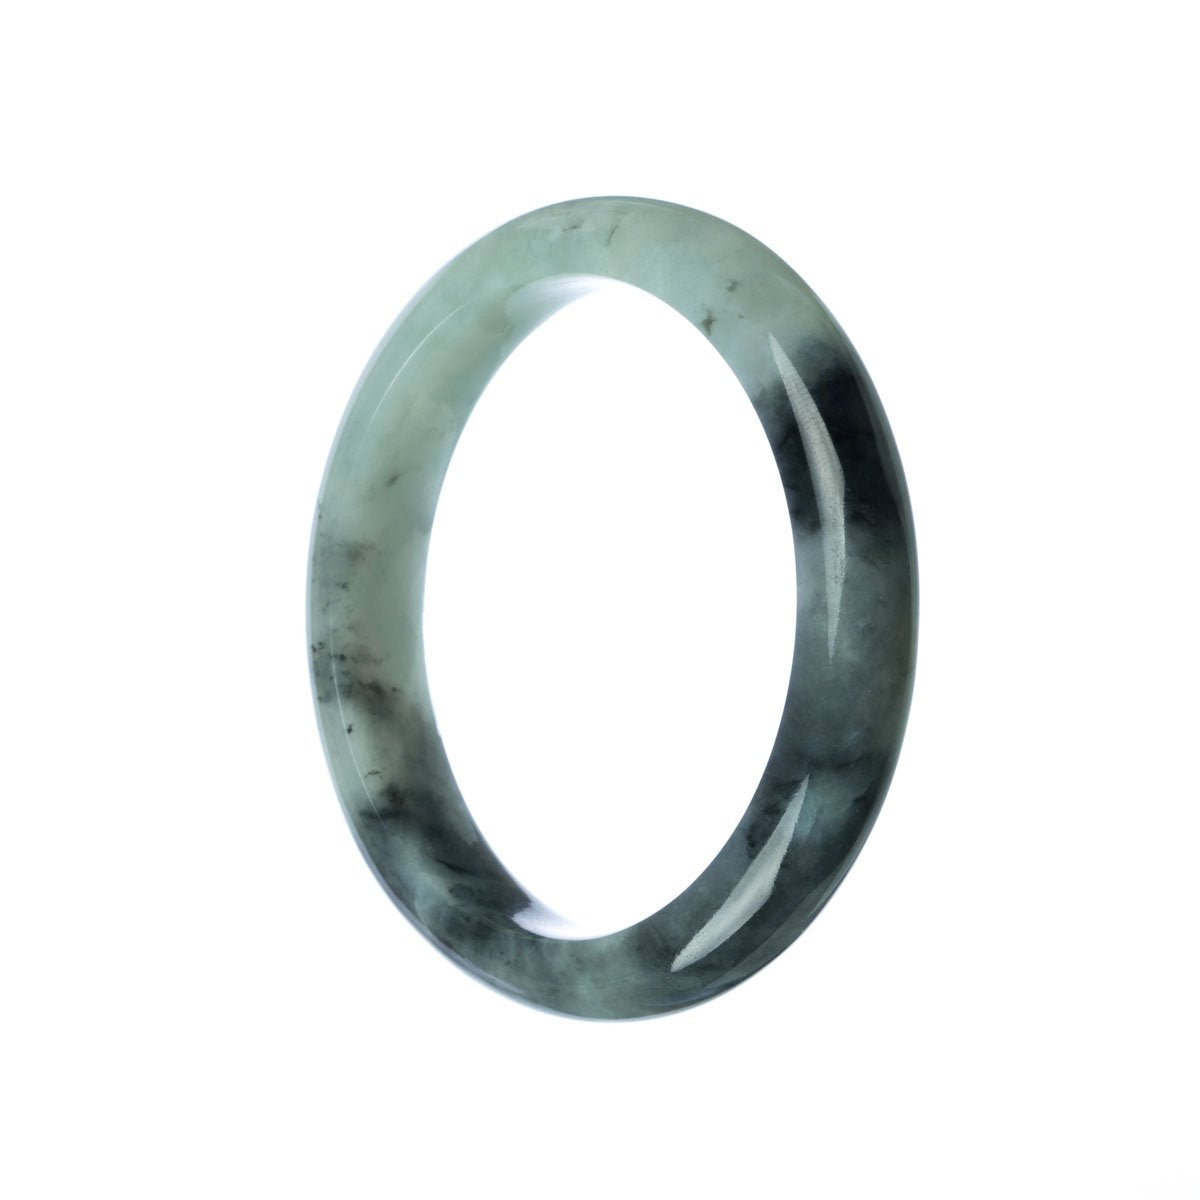 A close-up image of a grey traditional jade bracelet, 58mm in size, with a semi-round shape. The bracelet is made of genuine grade A jade and is sold by MAYS GEMS.